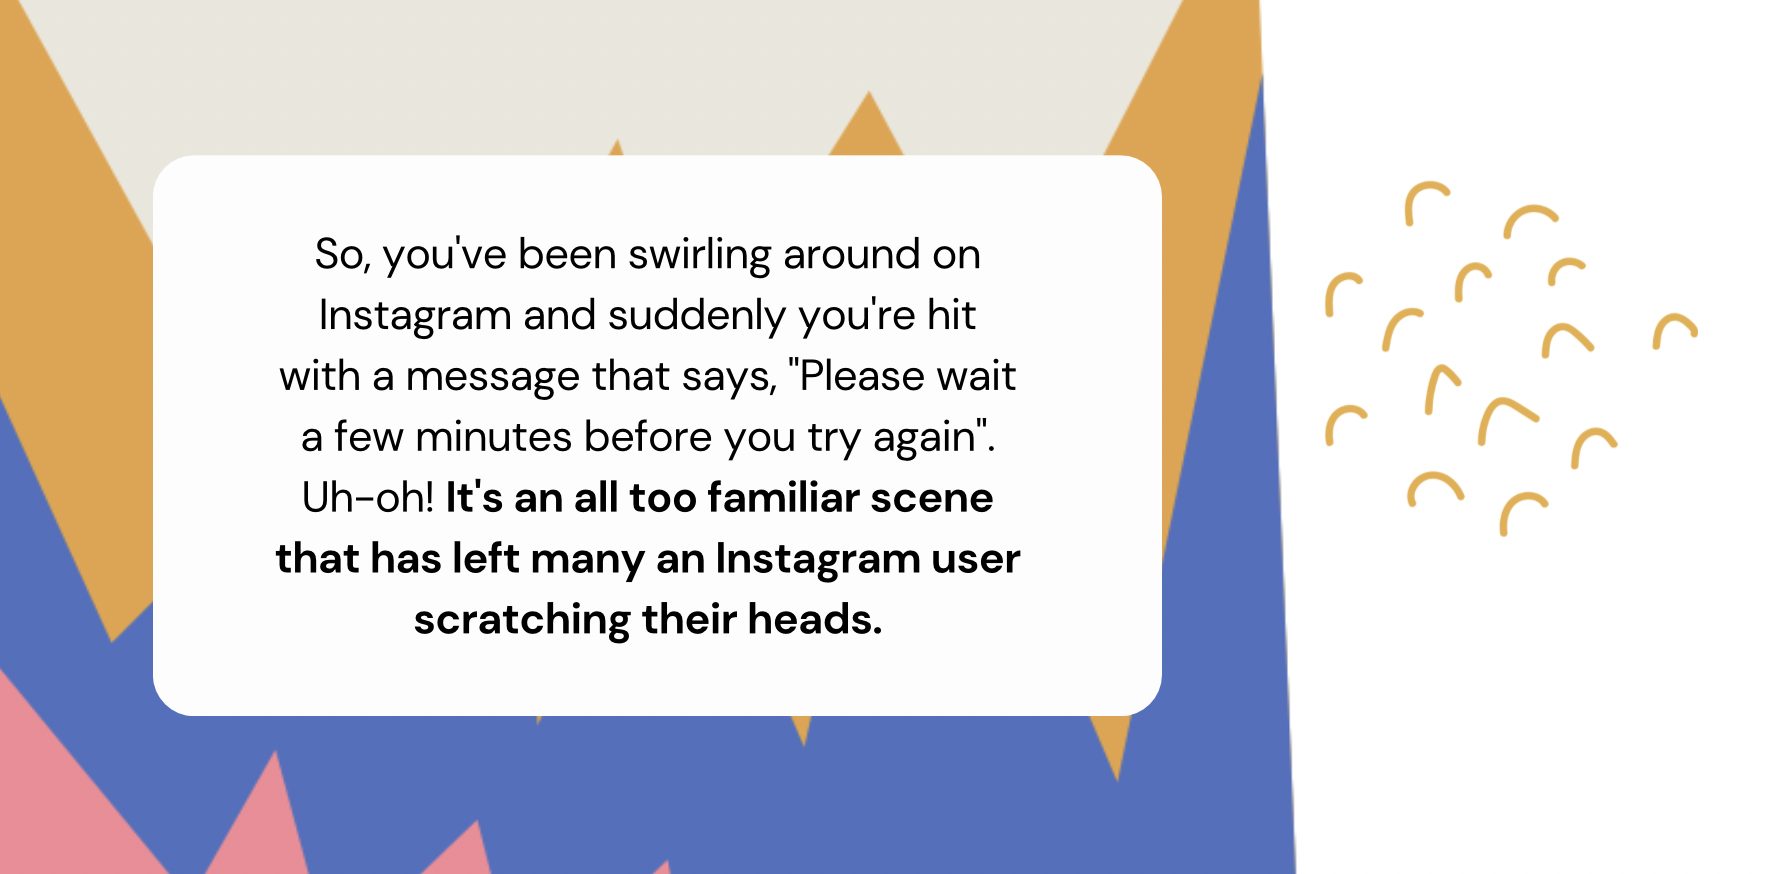 Solved: “Please wait a few minutes before you try again” on Instagram